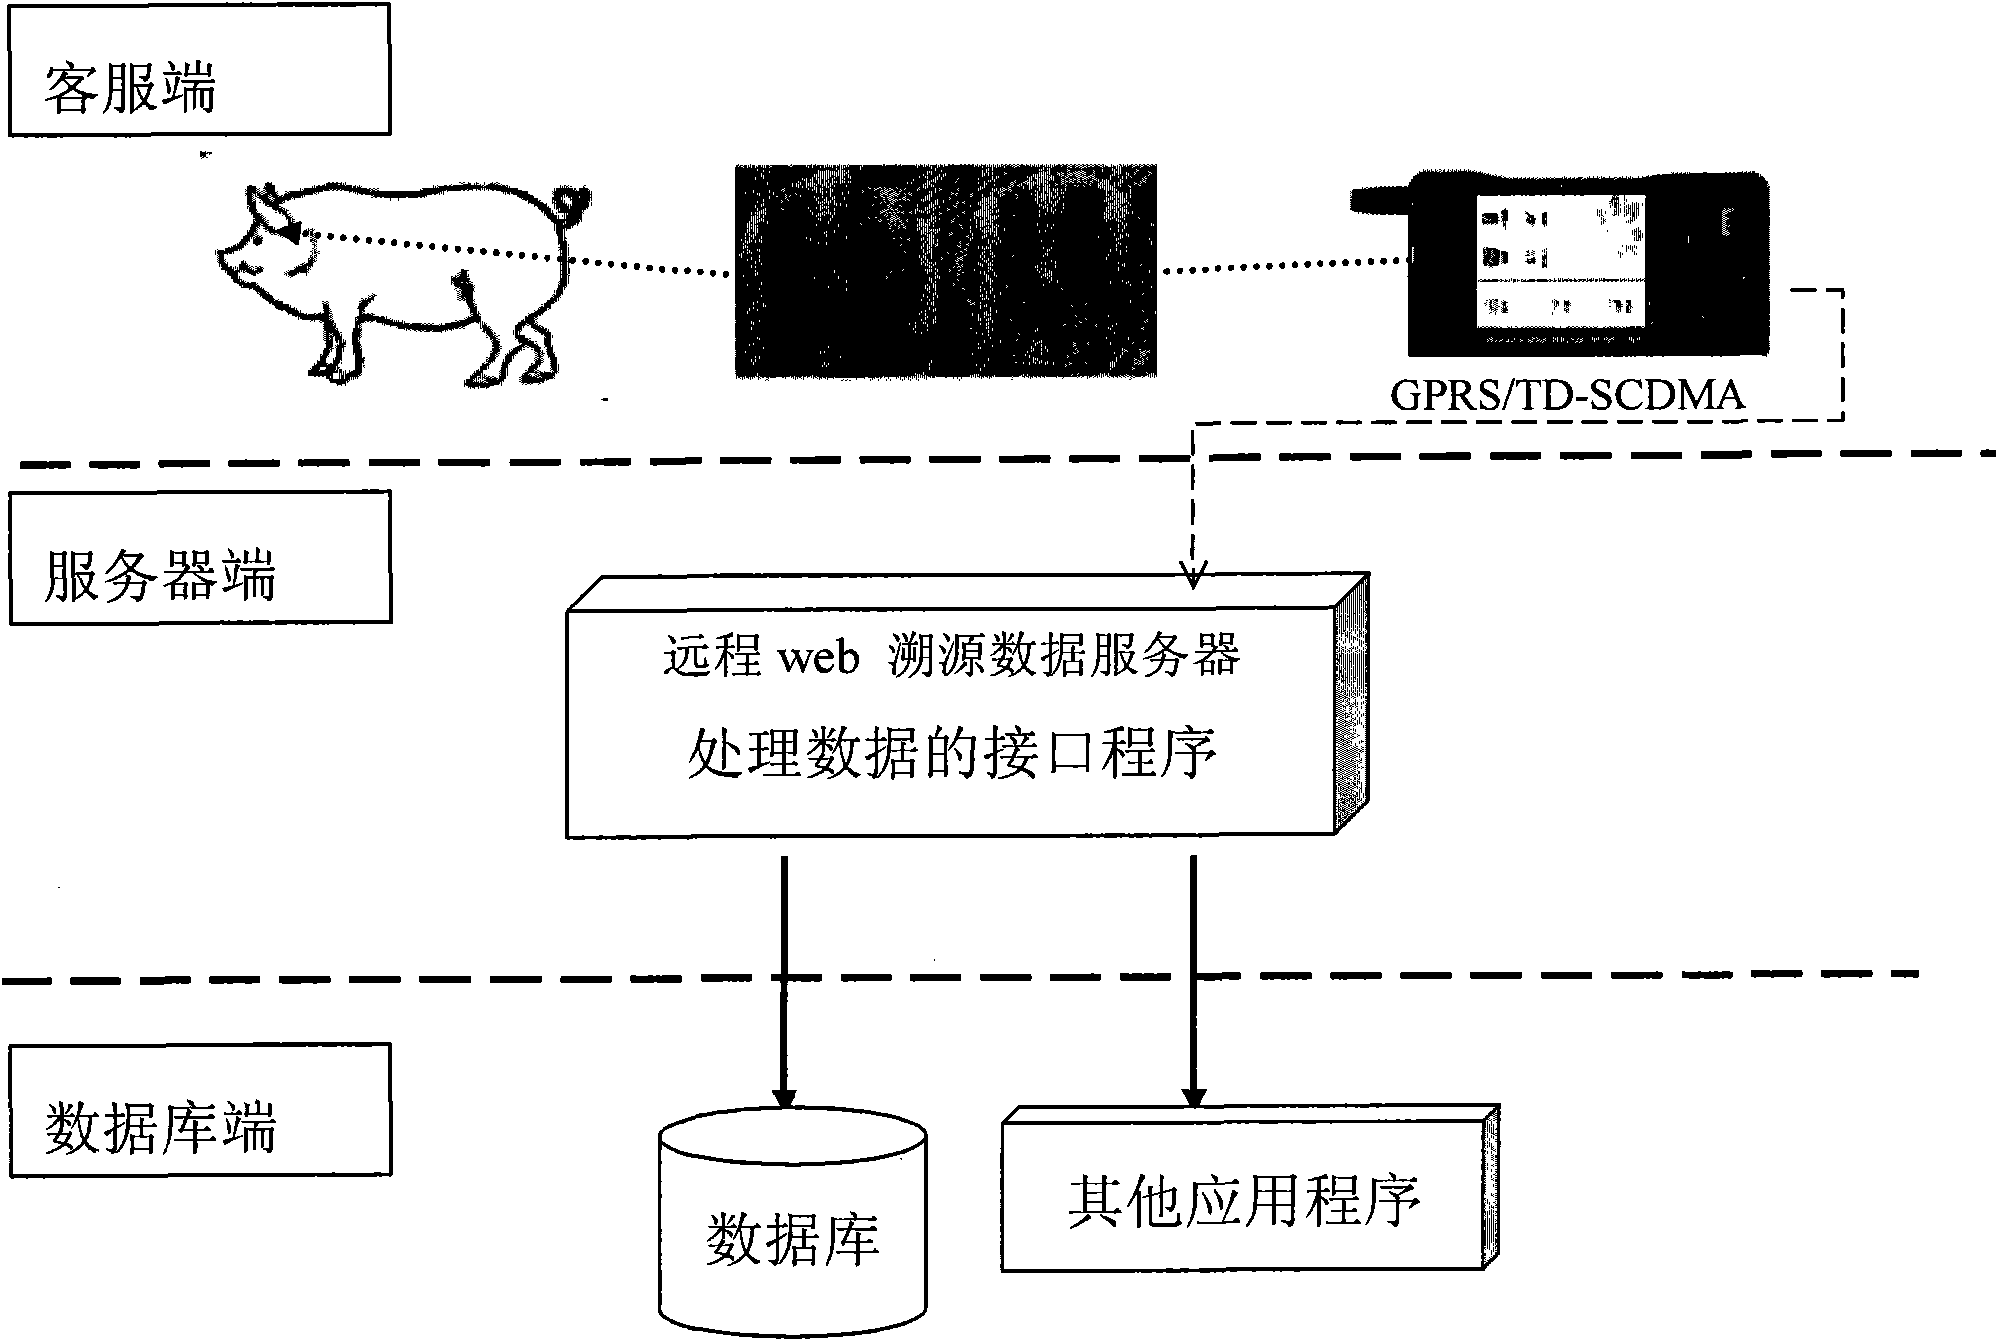 Mobile intelligent terminal-based building method of pig breeding electronic record